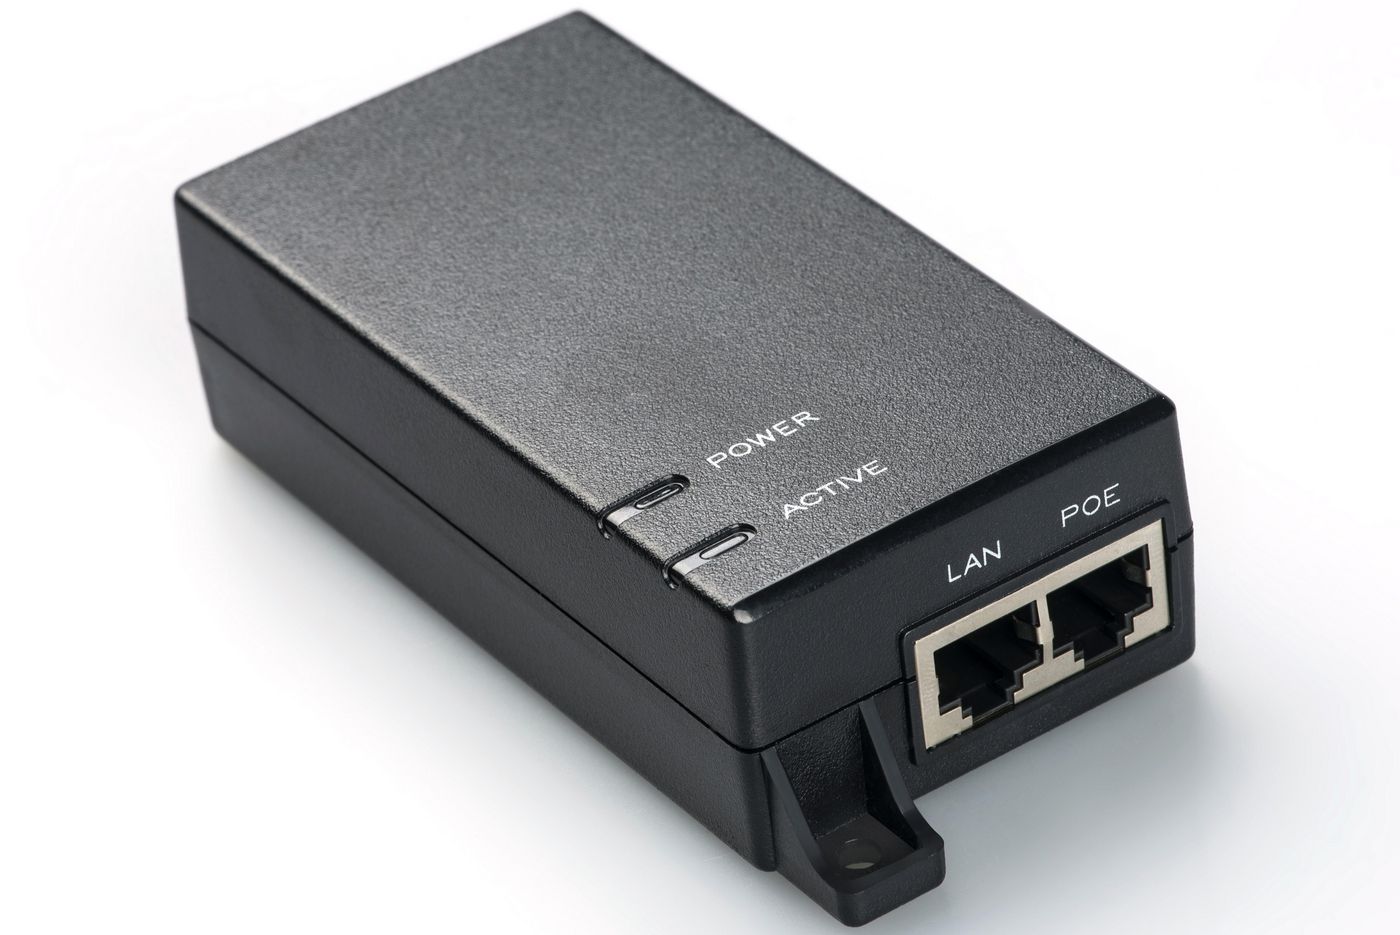 Intellinet 524179 Power over Ethernet (PoE) Injector